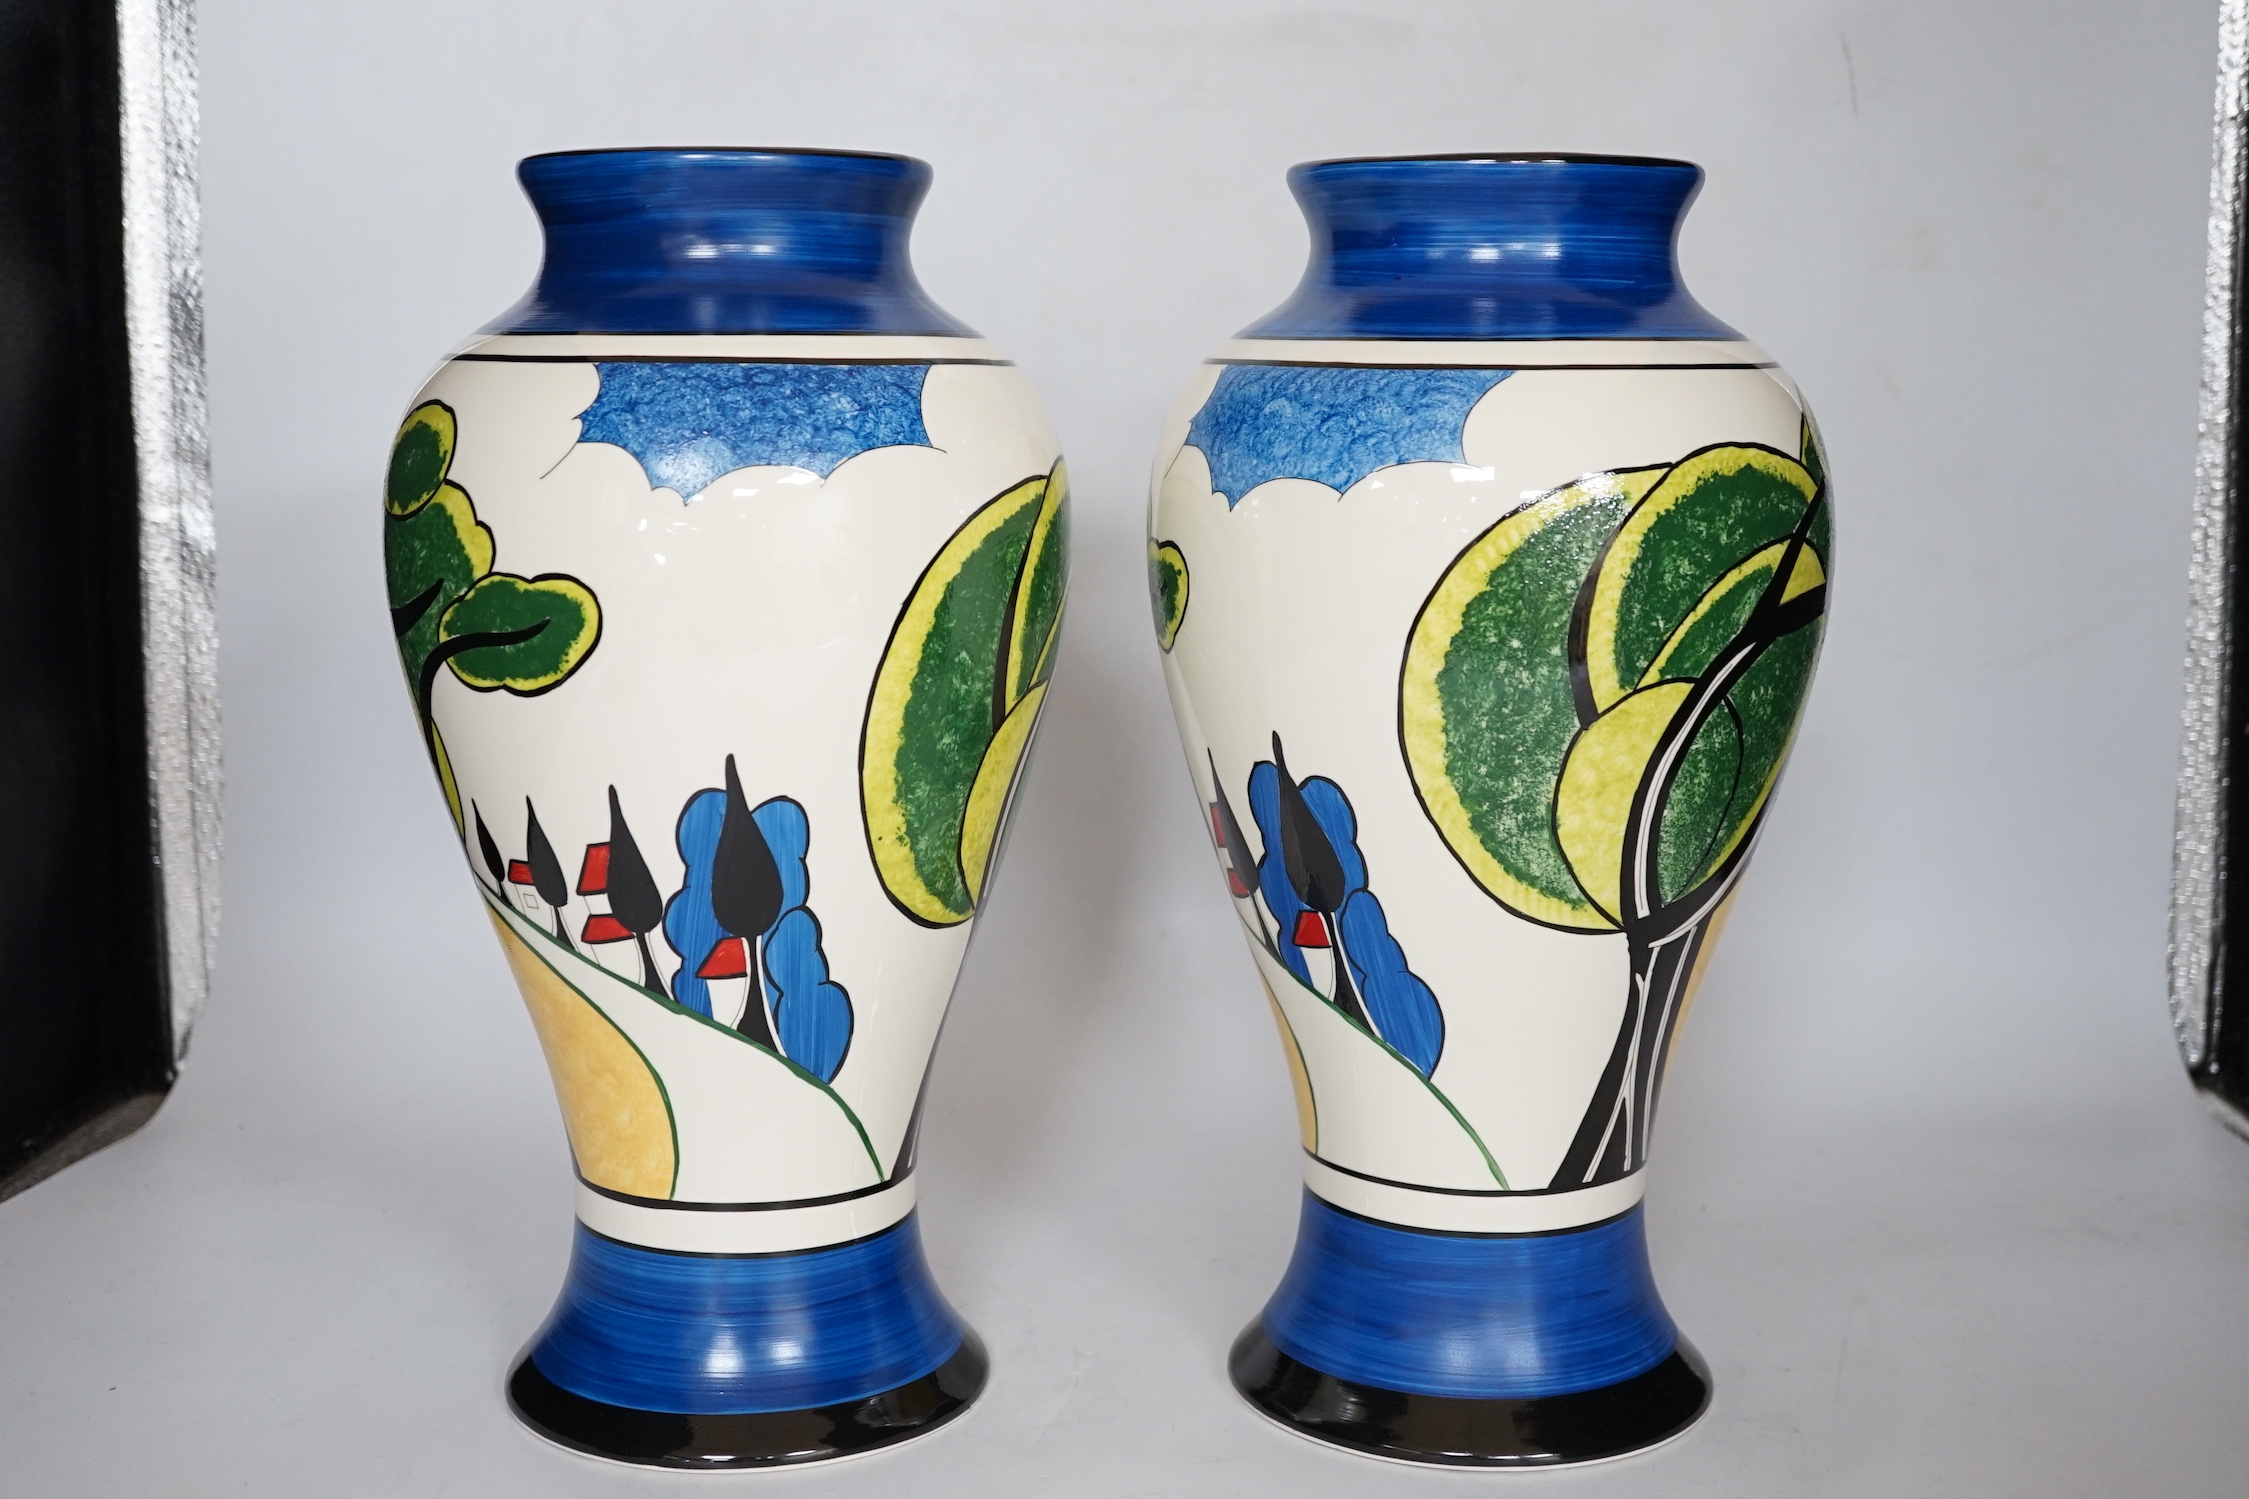 Two Wedgwood Clarice Cliff limited edition May Avenue Mei Ping vases, each with boxes and certificates, 30cm high